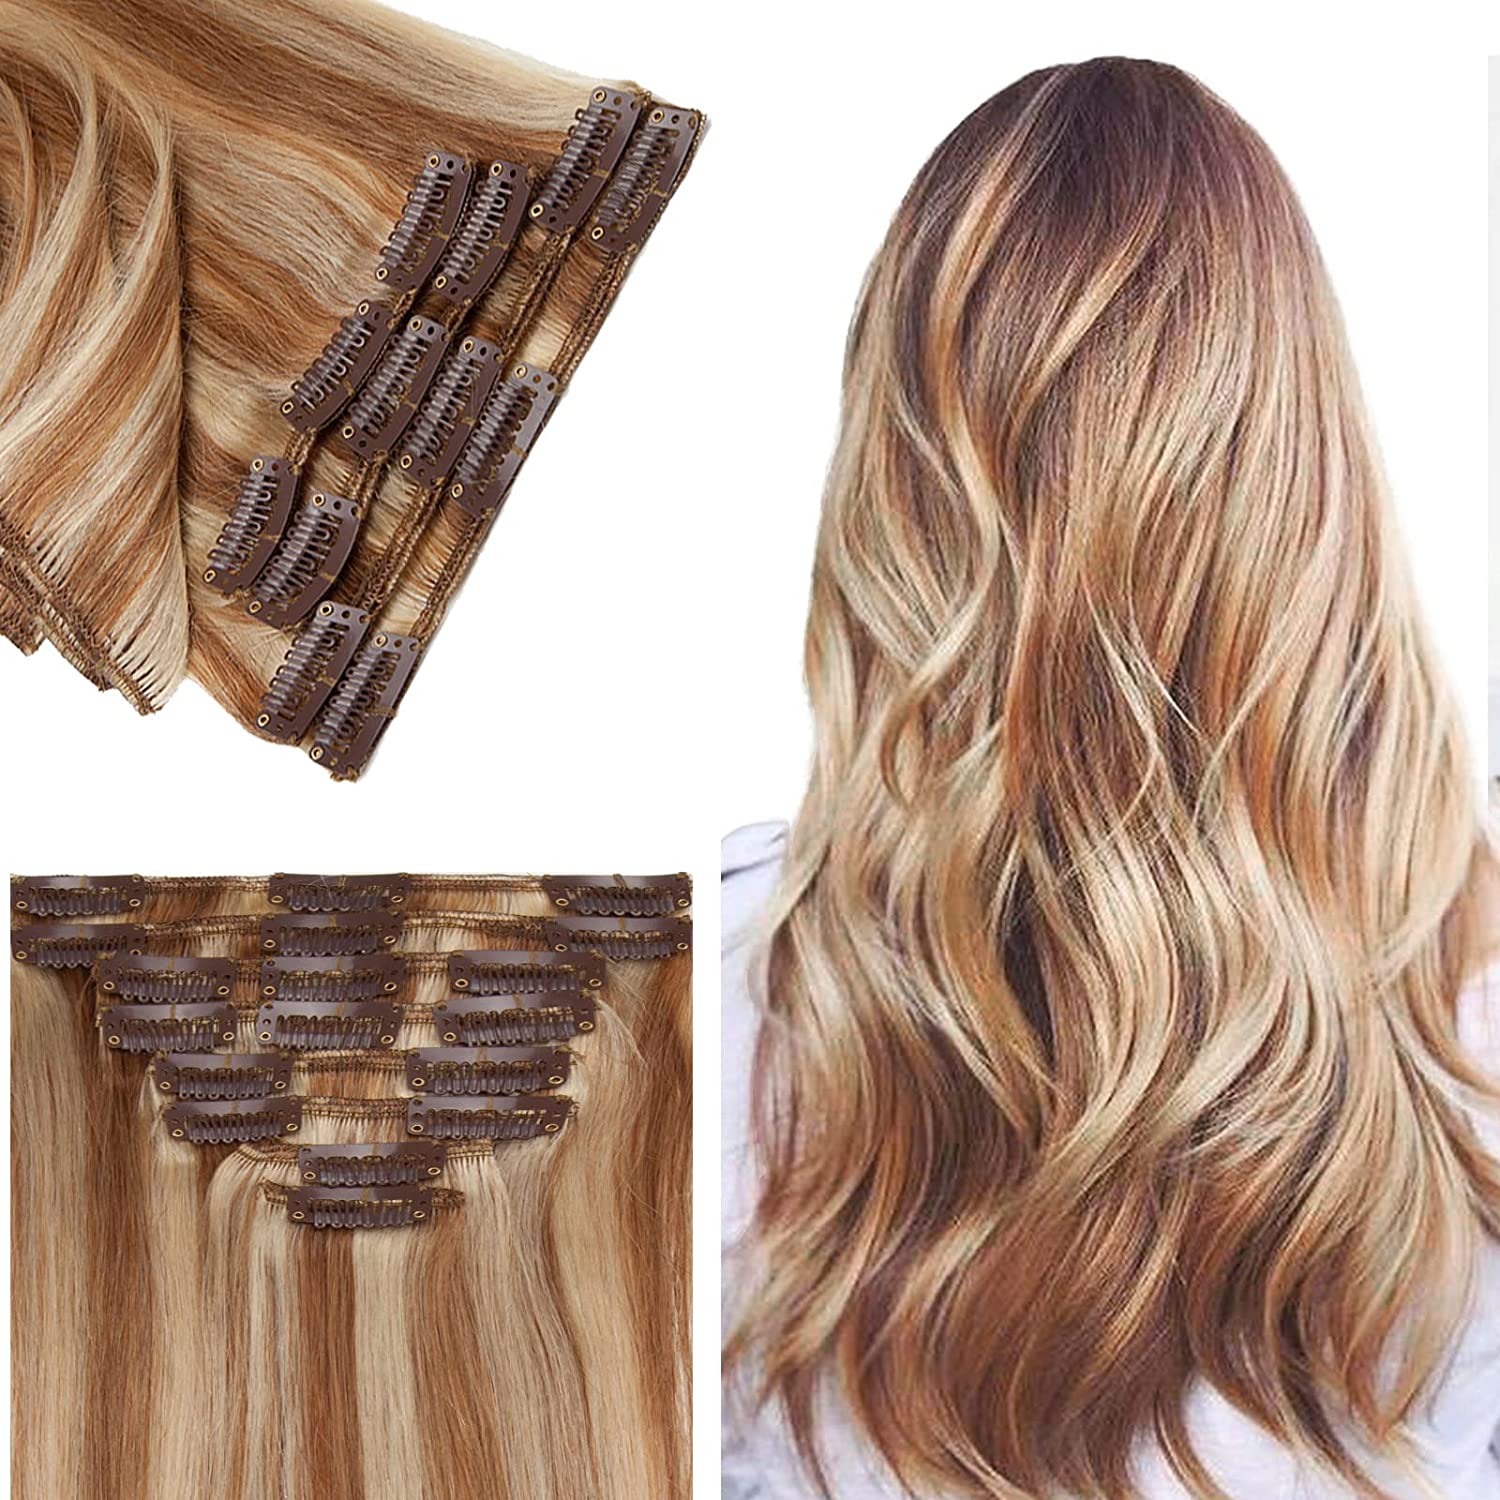 SEGO Clip in Hair Extensions Human Hair 8PCS 8-16inch